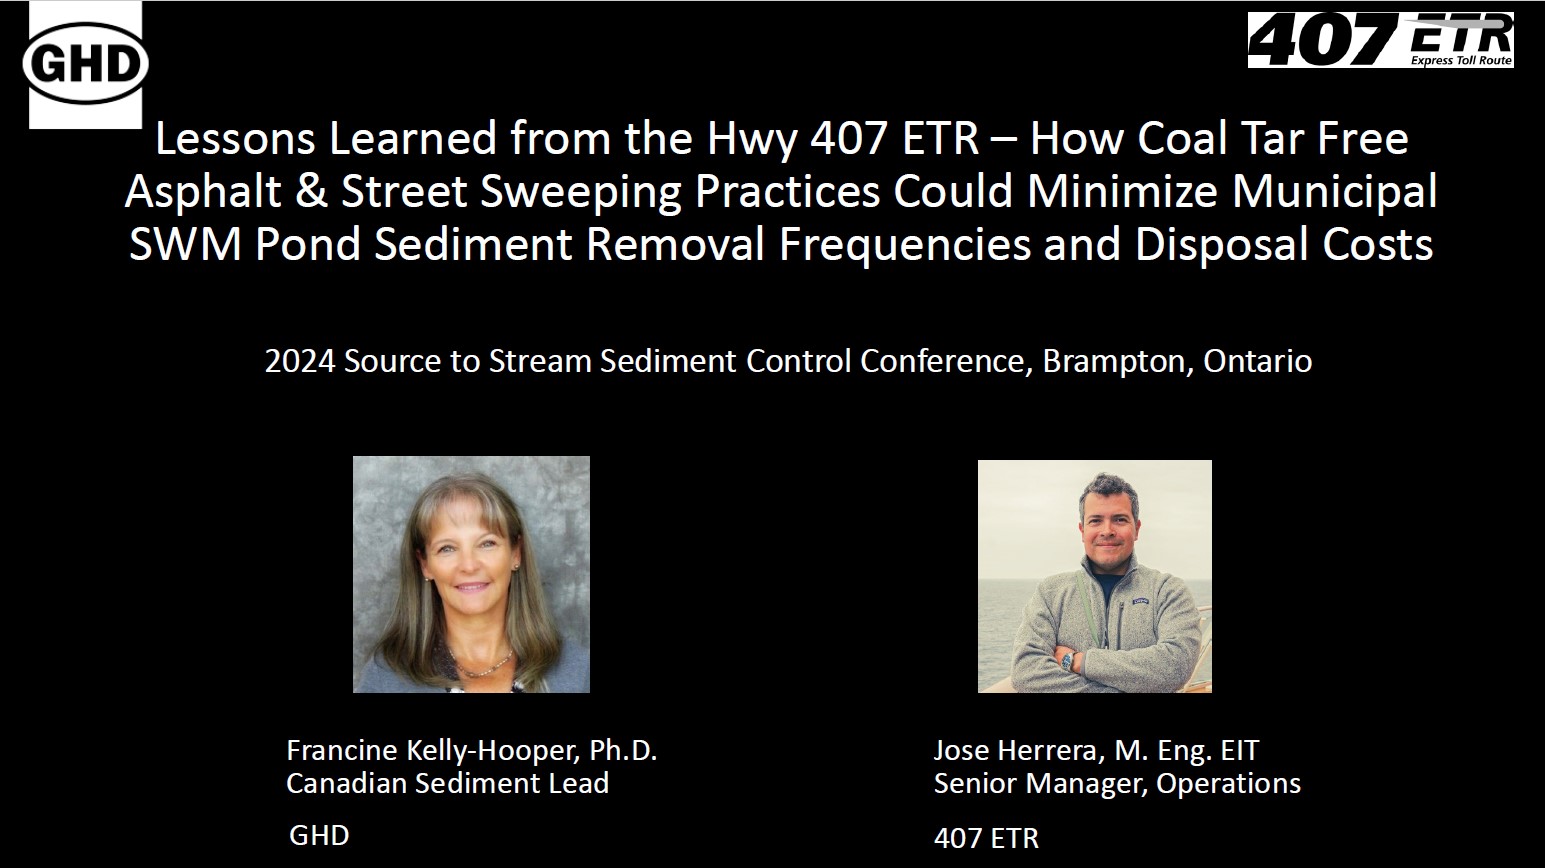 Lessons Learned from the Highway 407 ETR - presentation by Francine Kelly-Hooper and Jose Herrera